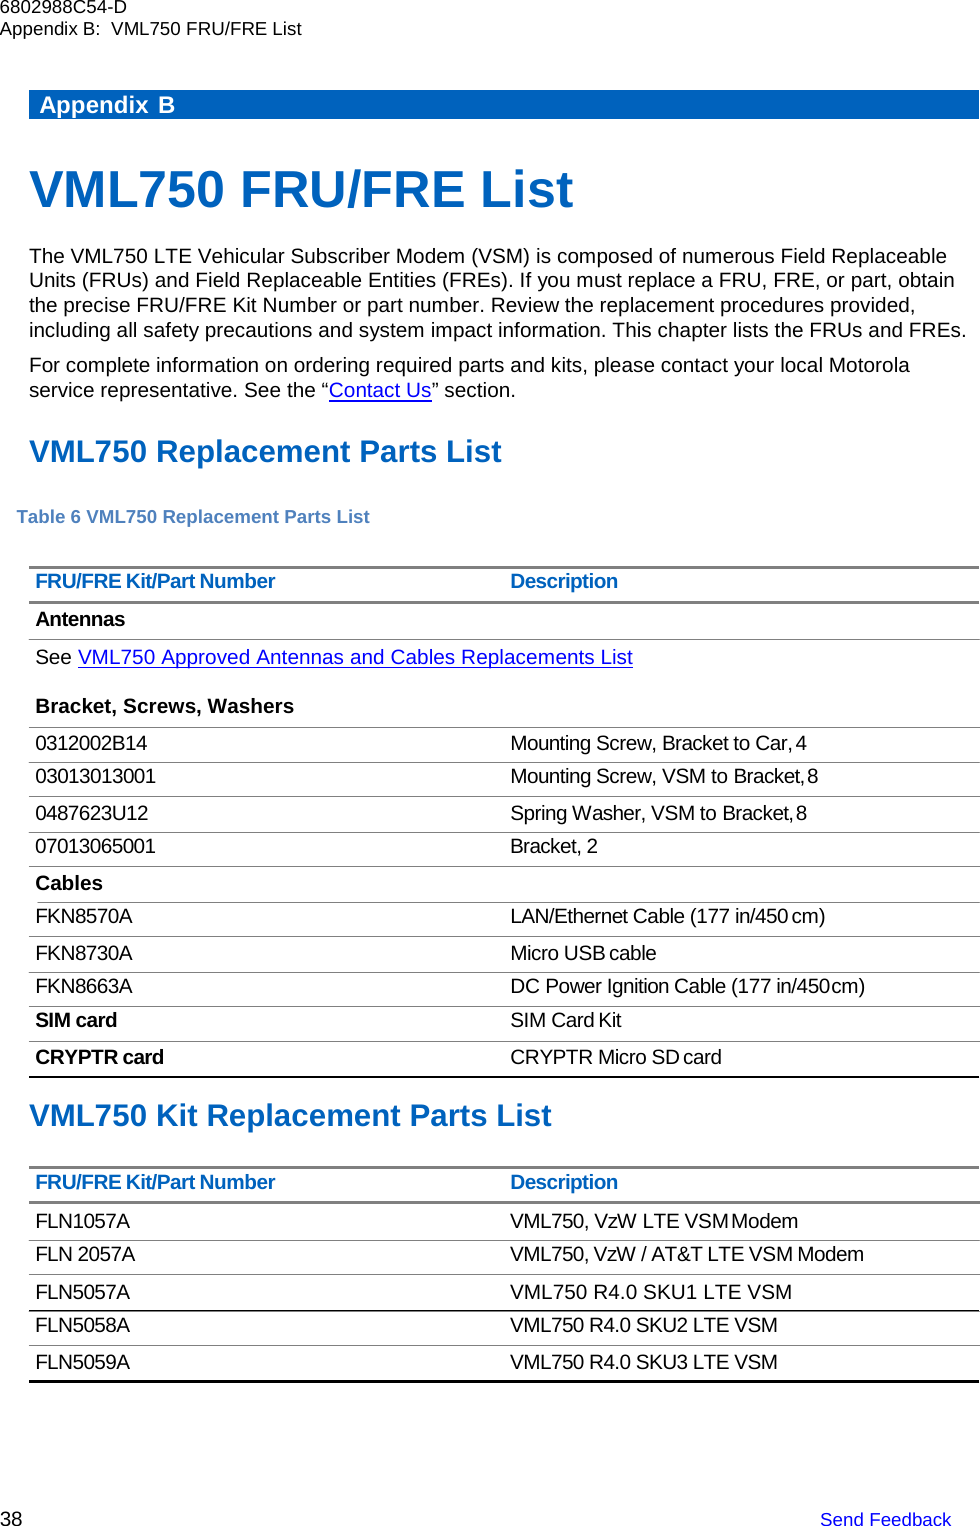 6802988C54-D Appendix B:  VML750 FRU/FRE List 38 Send Feedback   Appendix B VML750 FRU/FRE List The VML750 LTE Vehicular Subscriber Modem (VSM) is composed of numerous Field Replaceable Units (FRUs) and Field Replaceable Entities (FREs). If you must replace a FRU, FRE, or part, obtain the precise FRU/FRE Kit Number or part number. Review the replacement procedures provided, including all safety precautions and system impact information. This chapter lists the FRUs and FREs. For complete information on ordering required parts and kits, please contact your local Motorola service representative. See the “Contact Us” section. VML750 Replacement Parts List Table 6 VML750 Replacement Parts ListFRU/FRE Kit/Part Number Description Antennas See VML750 Approved Antennas and Cables Replacements List Bracket, Screws, Washers 0312002B14 Mounting Screw, Bracket to Car, 4 03013013001 Mounting Screw, VSM to Bracket, 8 0487623U12 Spring Washer, VSM to Bracket, 8 07013065001 Bracket, 2 Cables FKN8570A  LAN/Ethernet Cable (177 in/450 cm) FKN8730A  Micro USB cable FKN8663A  DC Power Ignition Cable (177 in/450 cm) SIM card SIM Card Kit CRYPTR card CRYPTR Micro SD card VML750 Kit Replacement Parts List FRU/FRE Kit/Part Number Description FLN1057A VML750, VzW LTE VSM Modem FLN 2057A VML750, VzW / AT&amp;T LTE VSM Modem FLN5057A  VML750 R4.0 SKU1 LTE VSM FLN5058A  VML750 R4.0 SKU2 LTE VSM FLN5059A  VML750 R4.0 SKU3 LTE VSM 